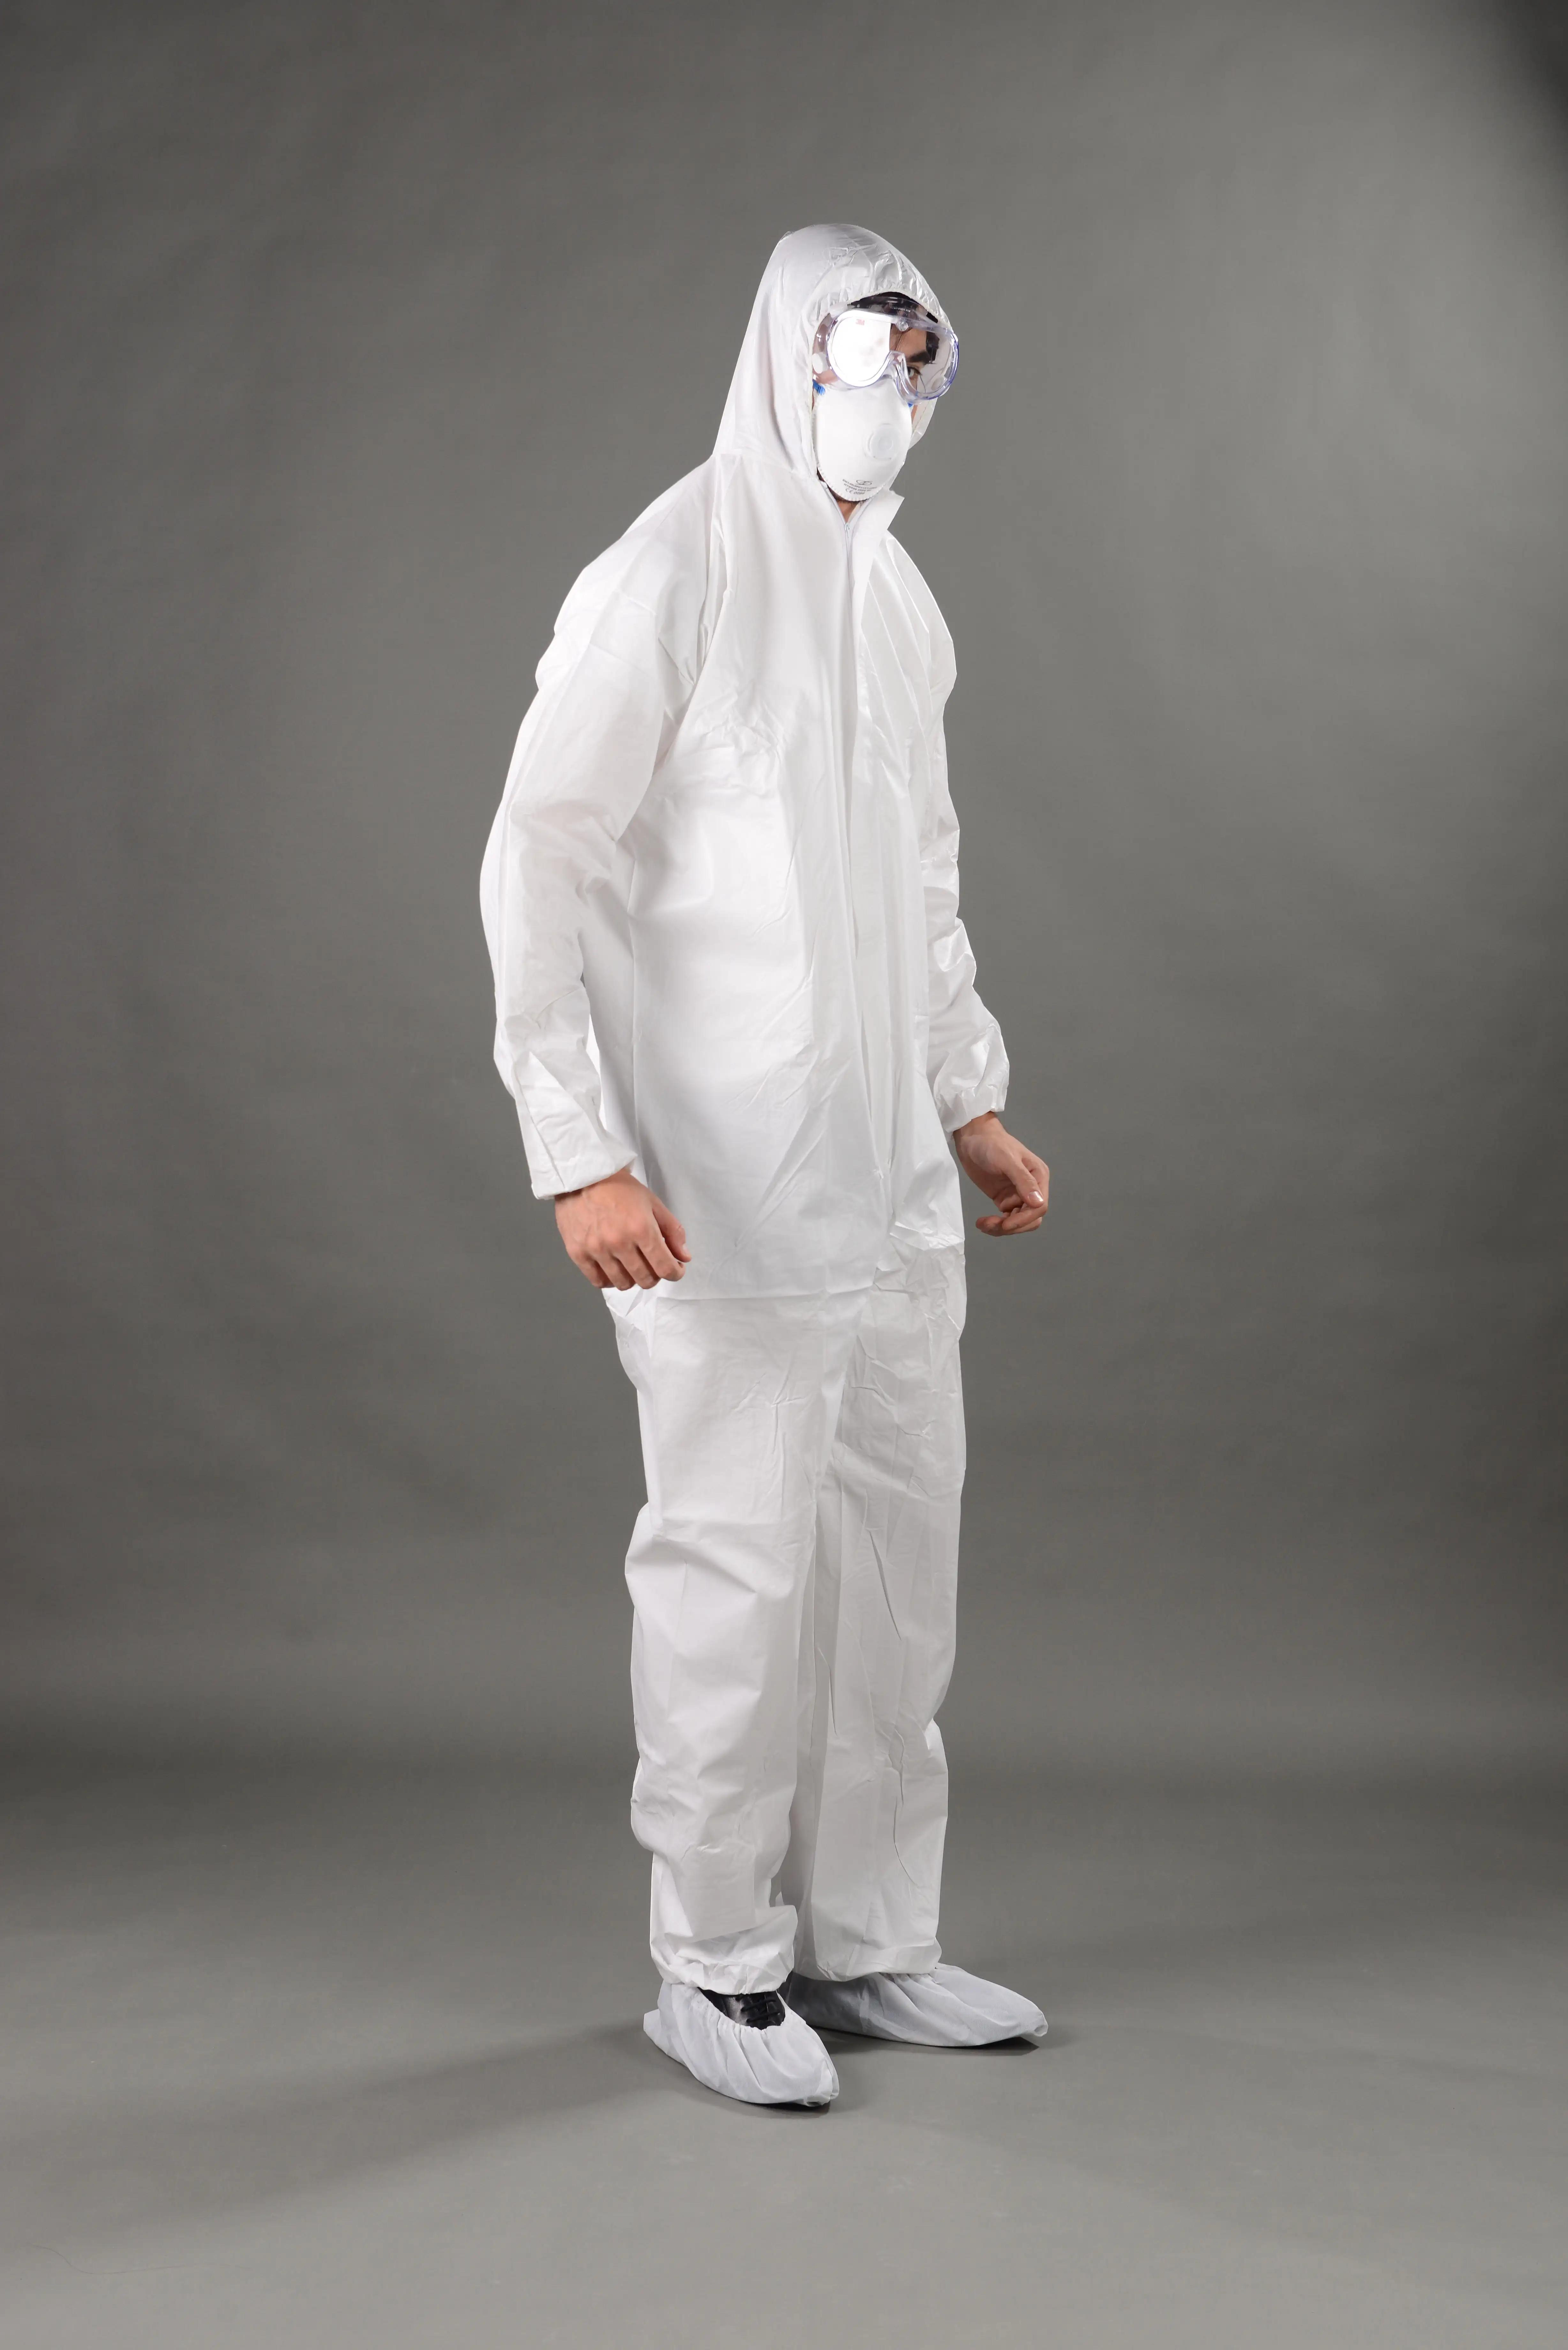 Waterproof Coverall TOPMED High Quality Disposable Protective Lightweight Coveralls Nonwoven SMS Safety Waterproof Overall White Workwear Coverall